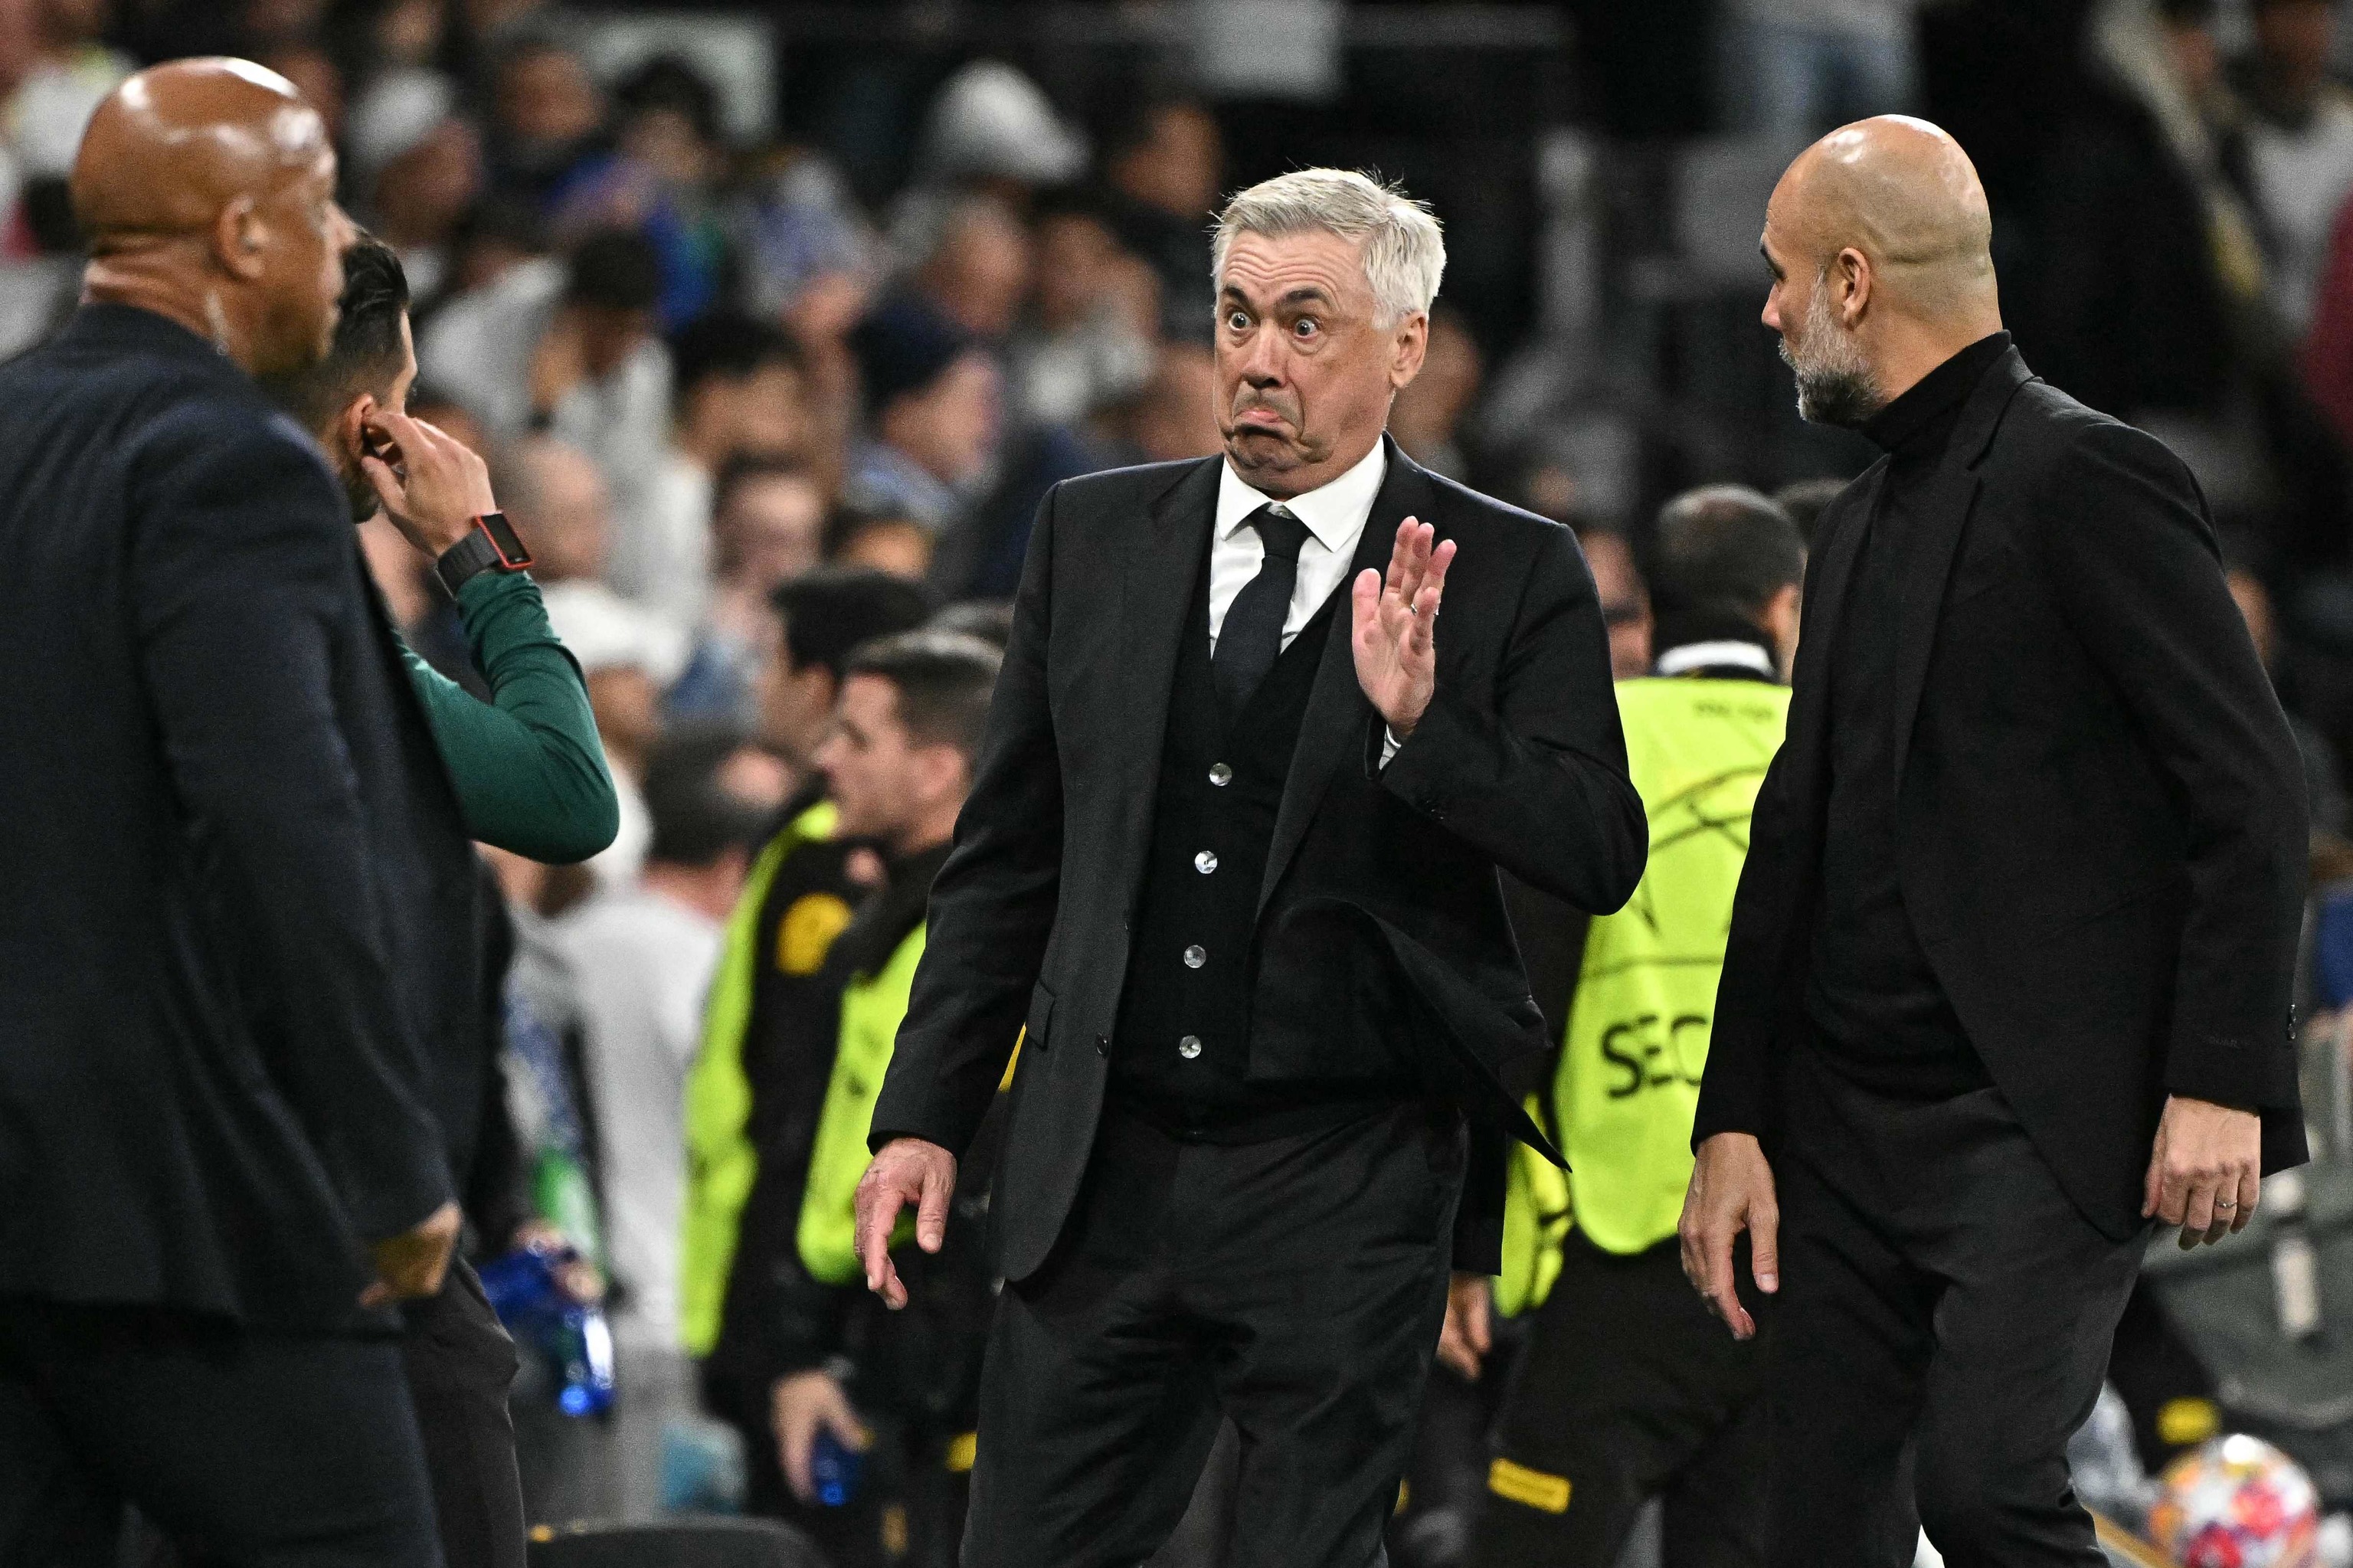 Carlo Ancelotti has already made one important call for Real Madrid-Bayern Munich – defender misses training